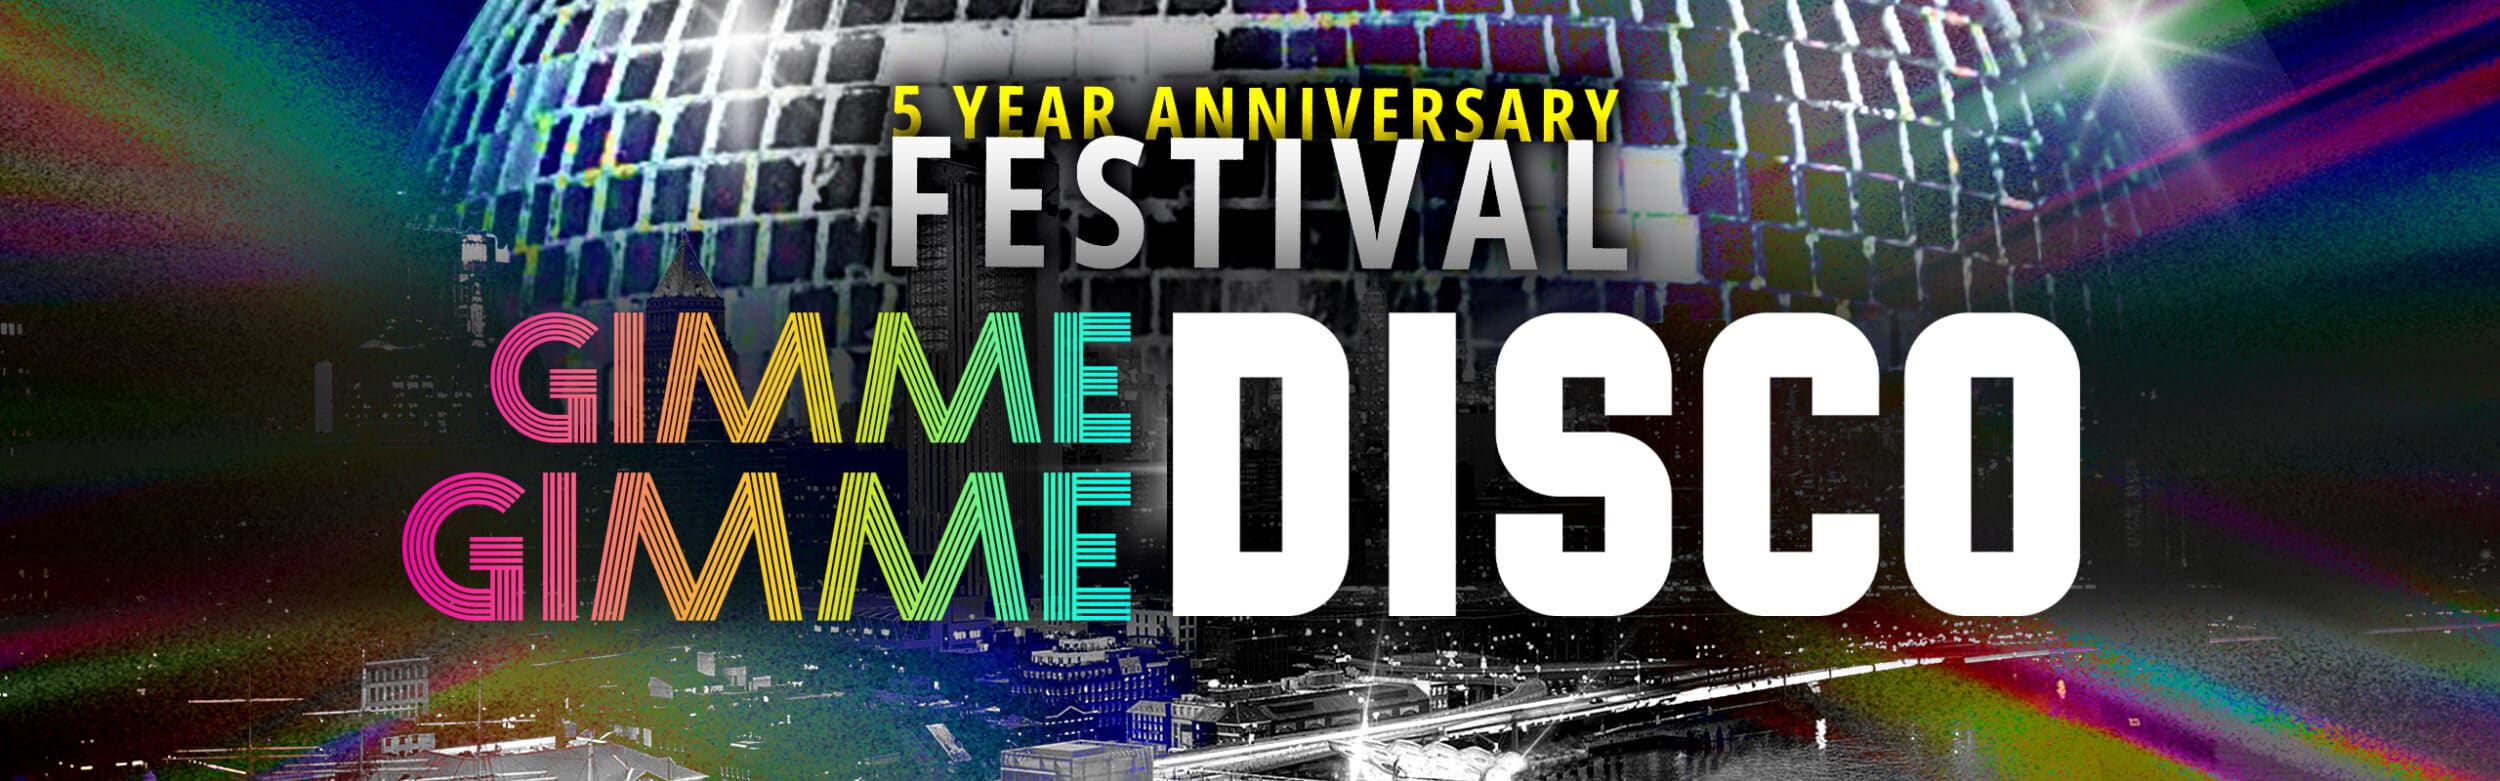 Gimme Gimme Disco – 5 Year Anniversary Festival